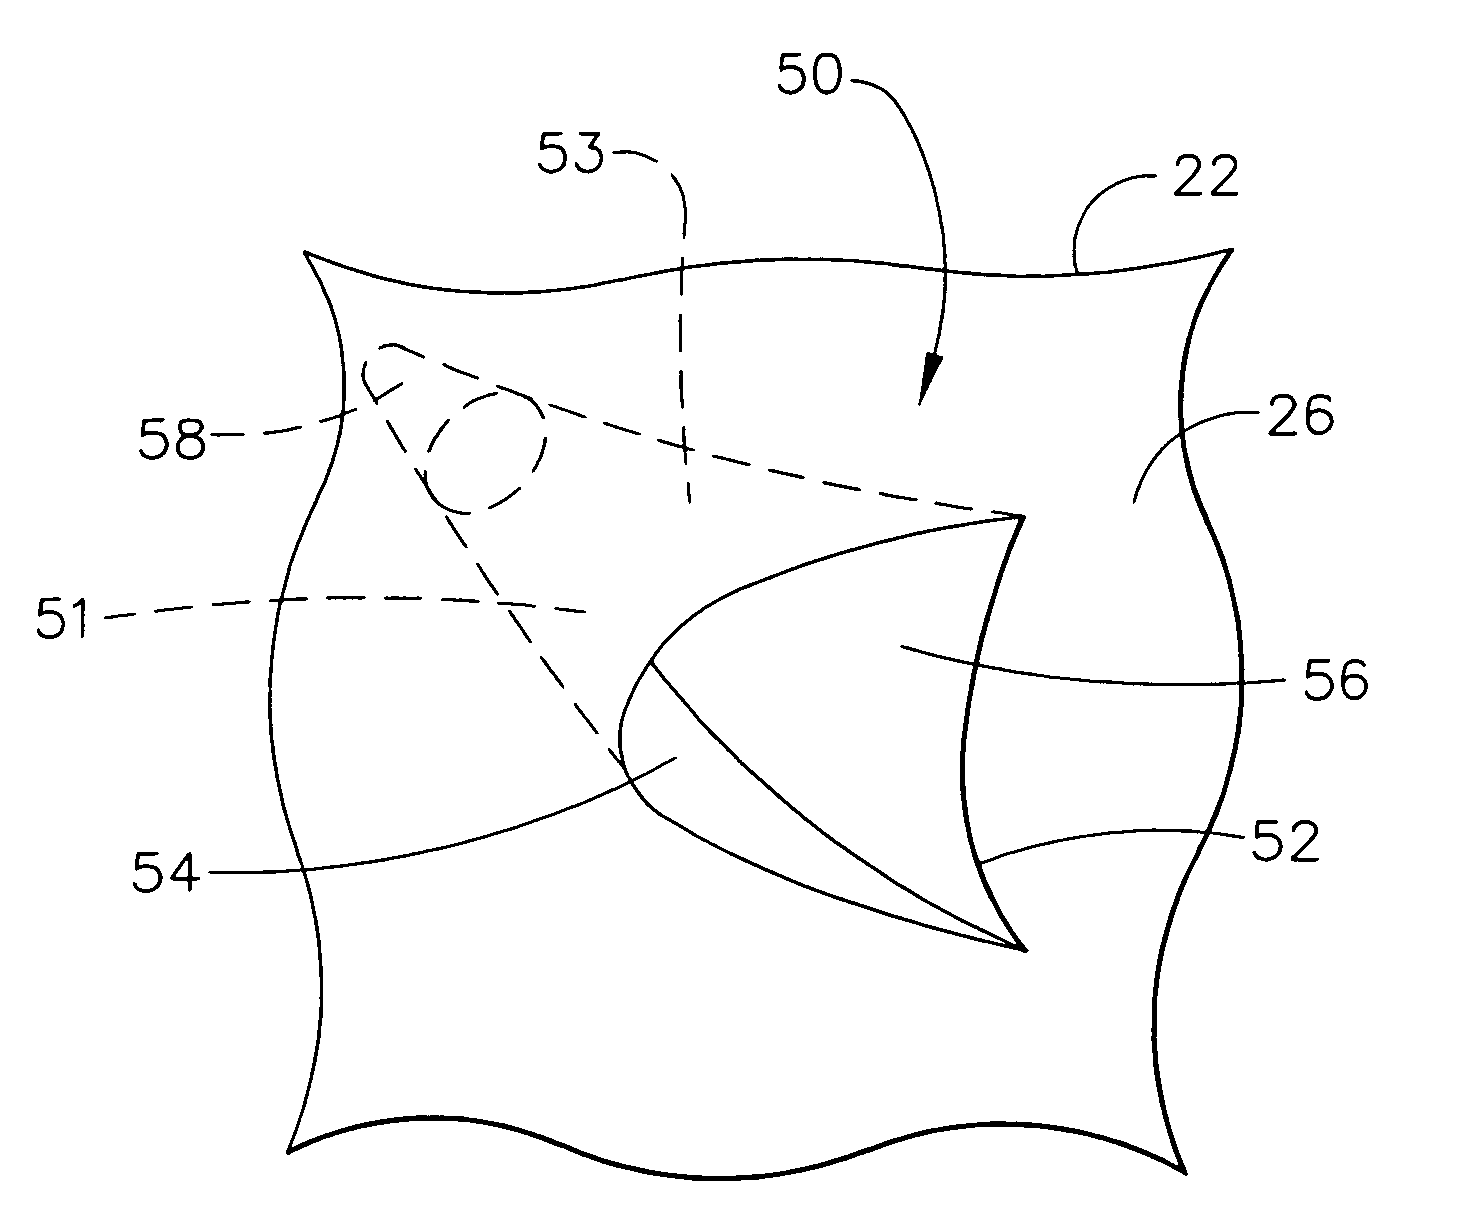 Bell-shaped fan cooling holes for turbine airfoil